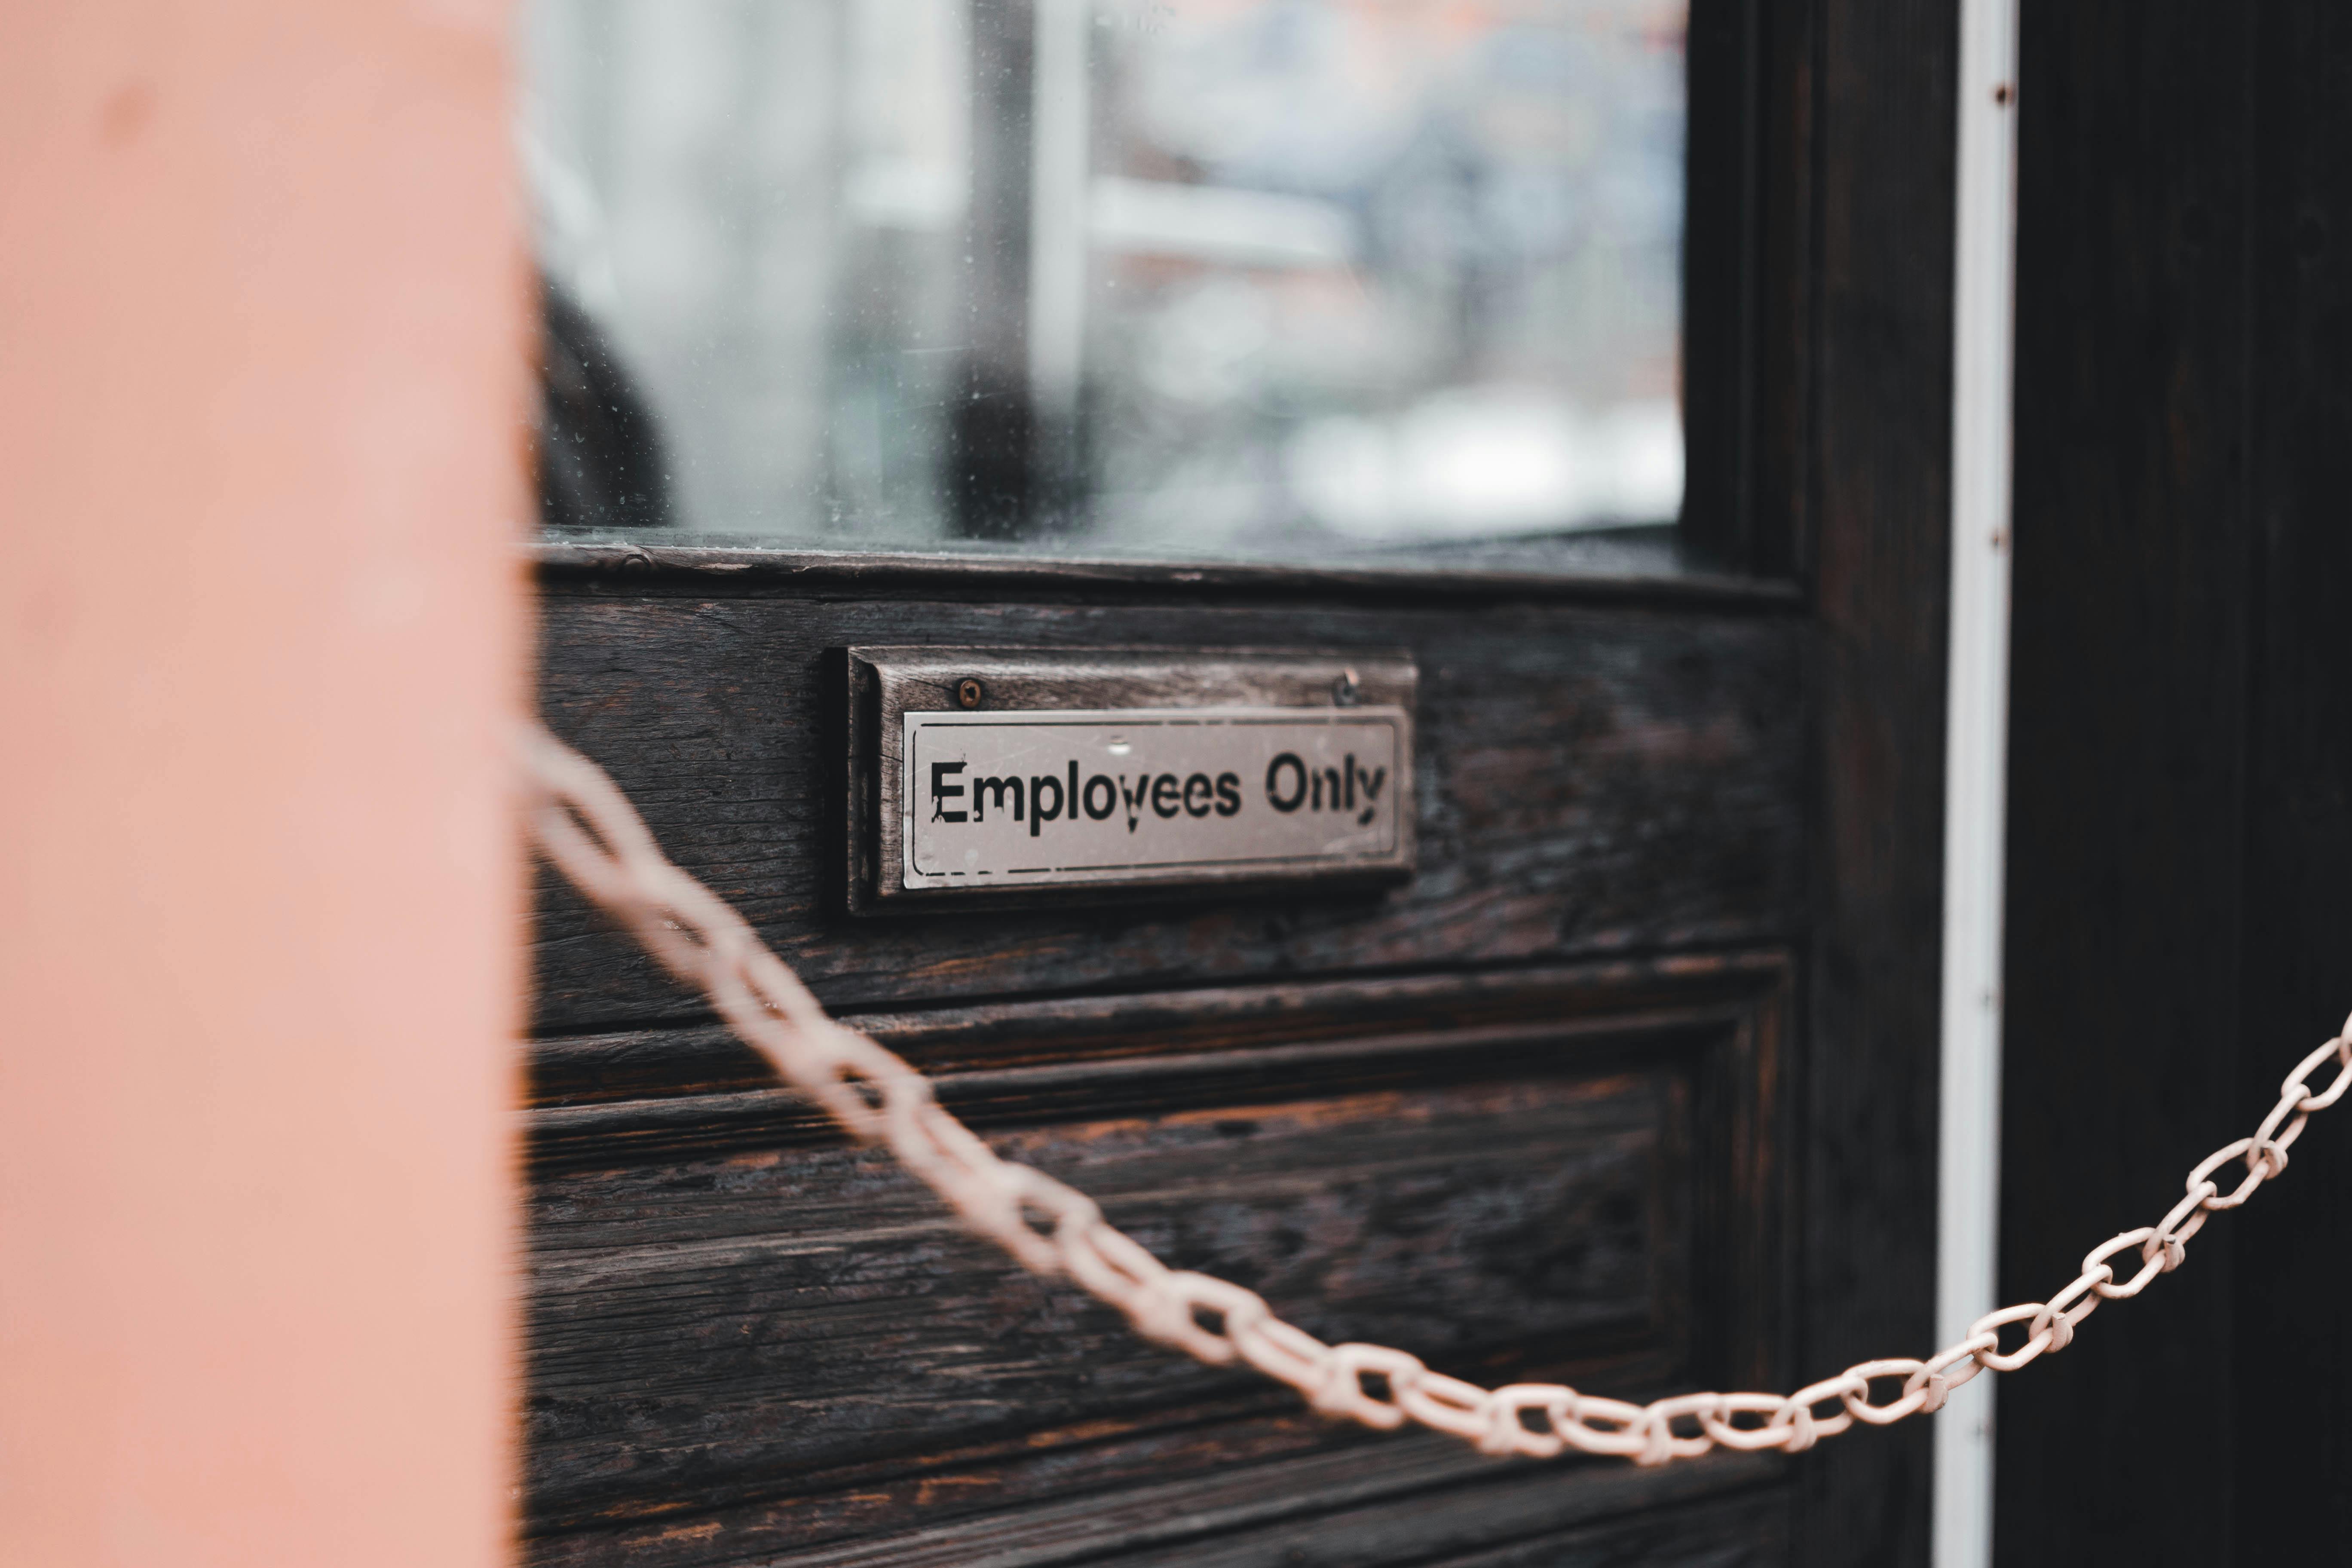 Signage indicating employees only. | Source: Pexels